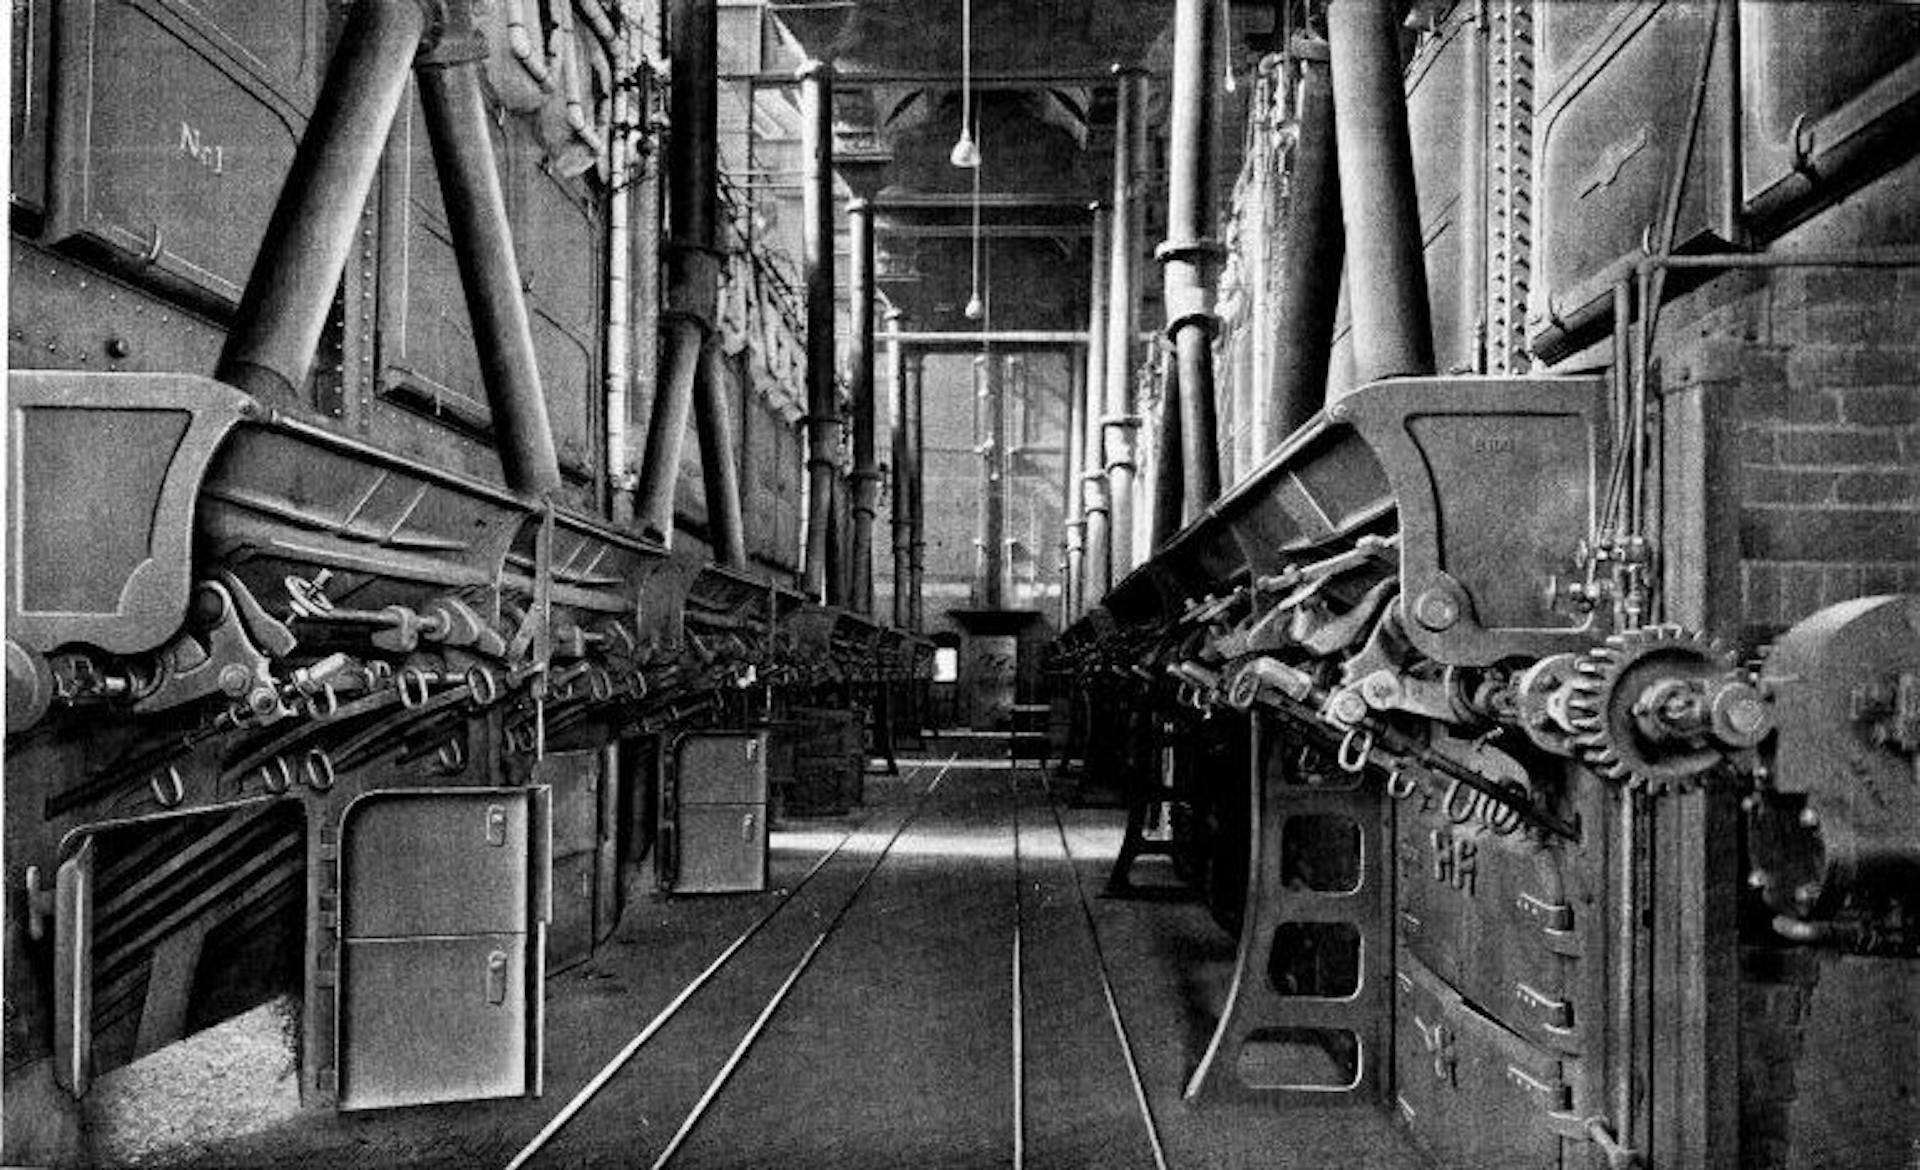 7200 Horse-power Installation of Babcock & Wilcox Boilers and Superheaters at the Capital Traction Co., Washington, D. C.